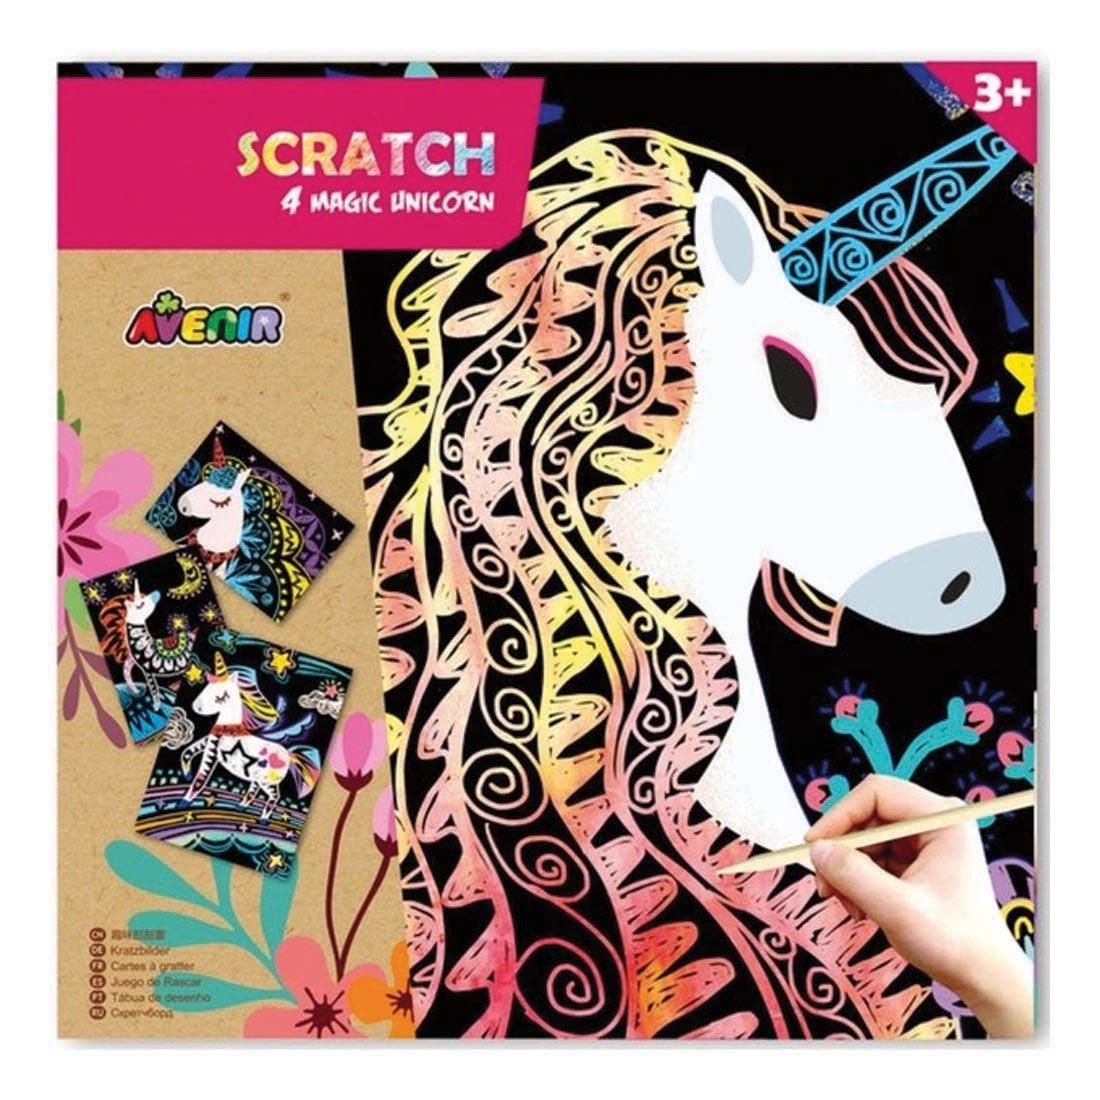 Front package of 4 Magic Unicorns Scratch Set by Avenir